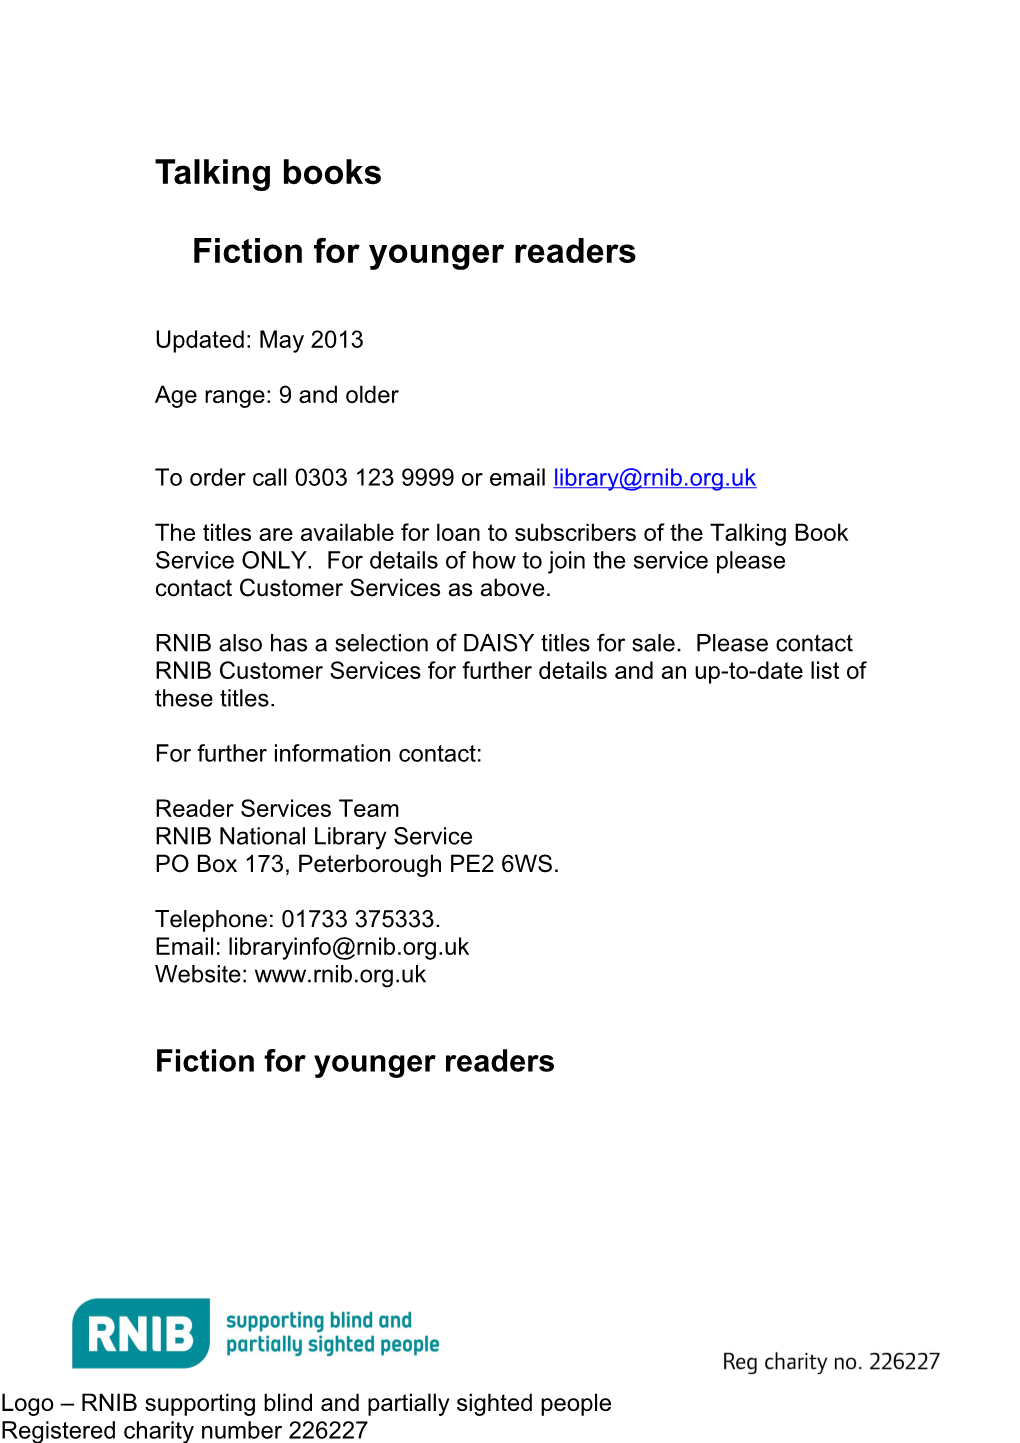 Fiction for Ages 9 and Older in Braille (Word, 200KB)